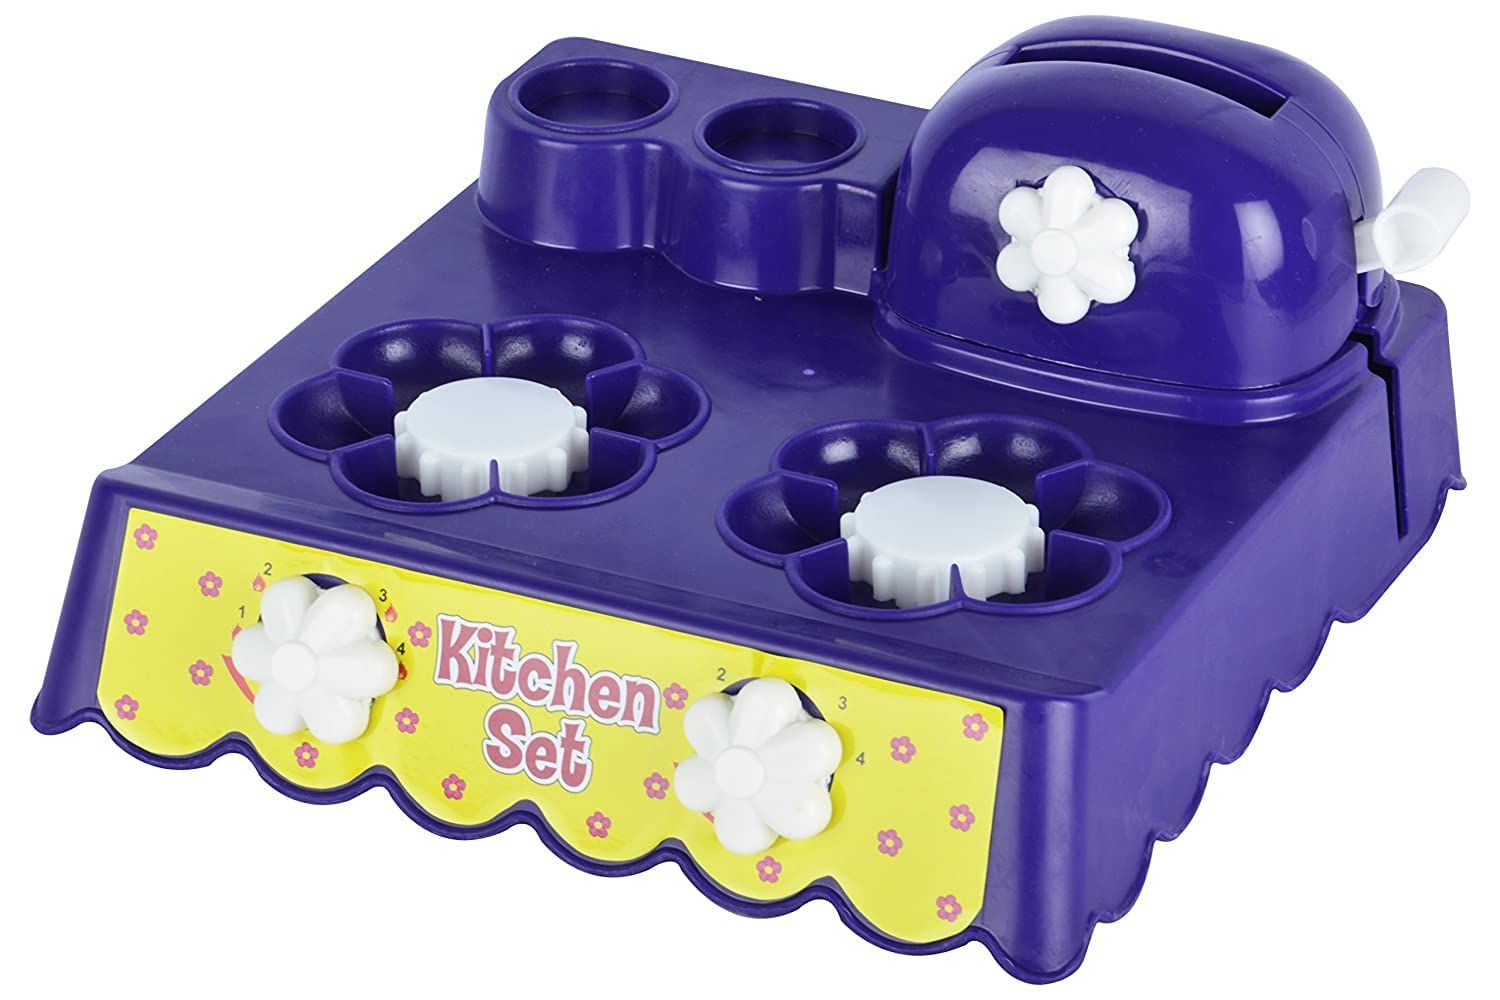 Giggles Funskool Giggles, Kitchen Set, Colourful Pretend And Play Cooking Set, Language And Social Skills,Role Play, 3 Years & Above, Preschool Toys